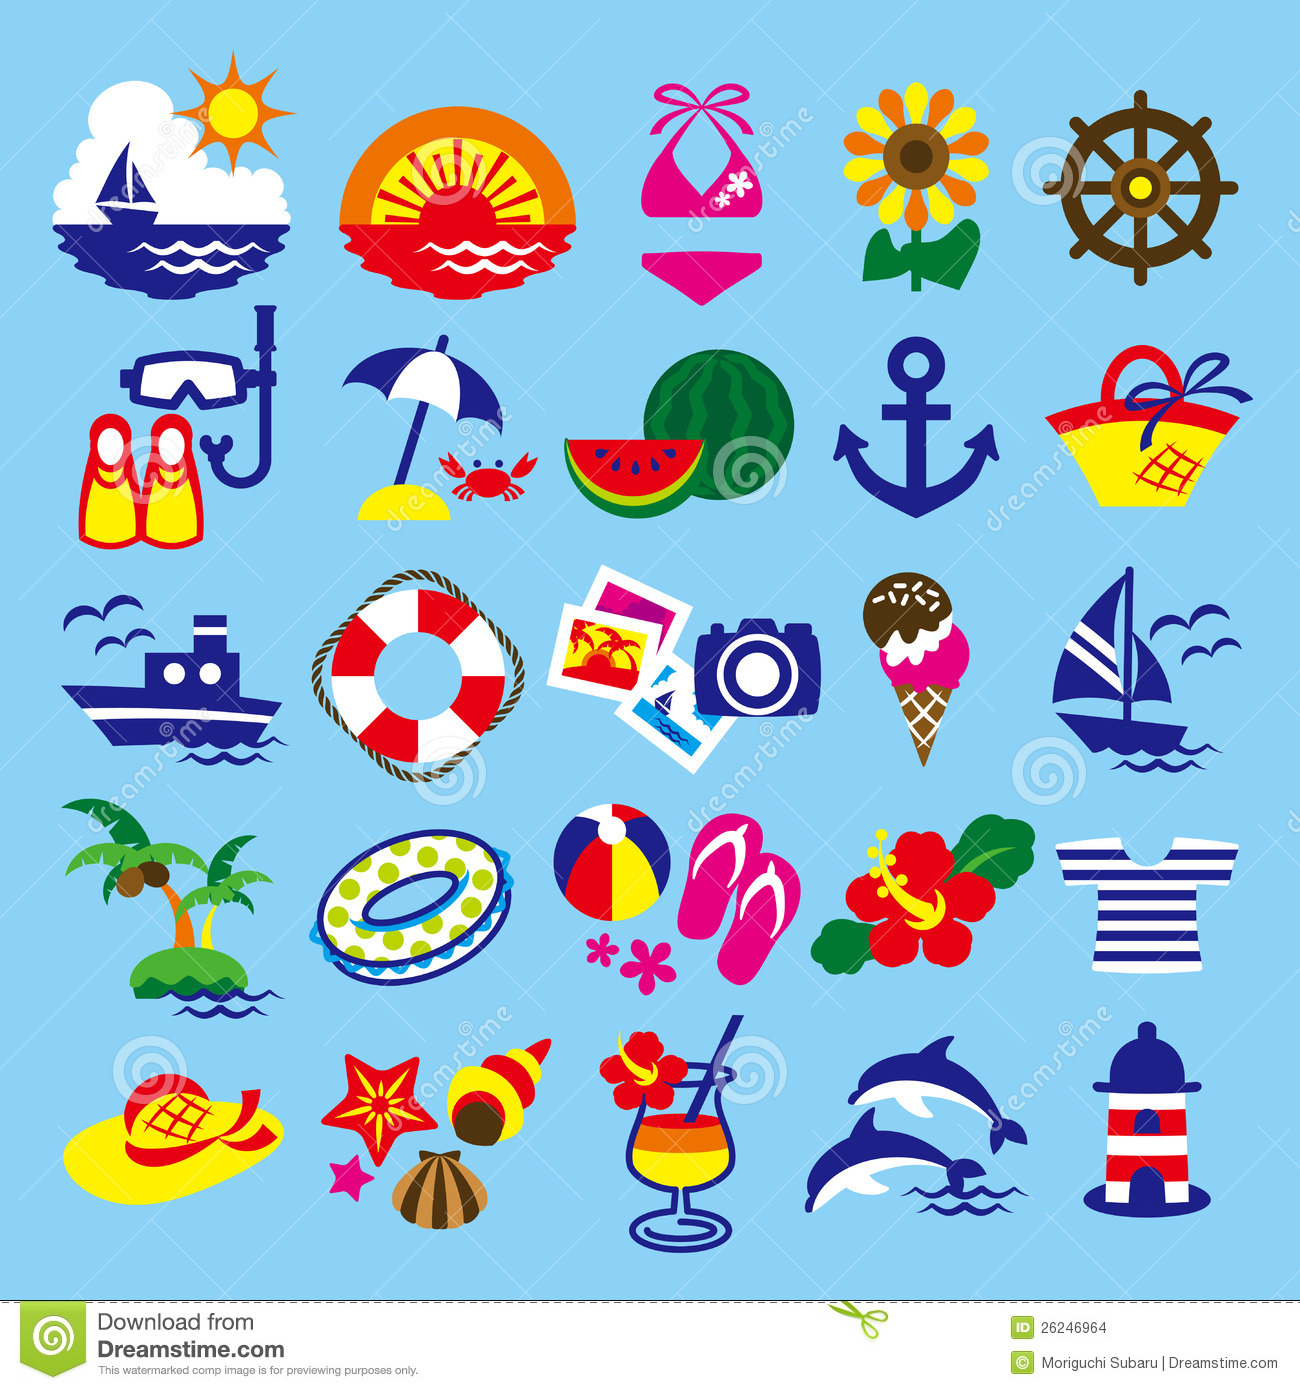 Summer season clipart 20 free Cliparts | Download images ...